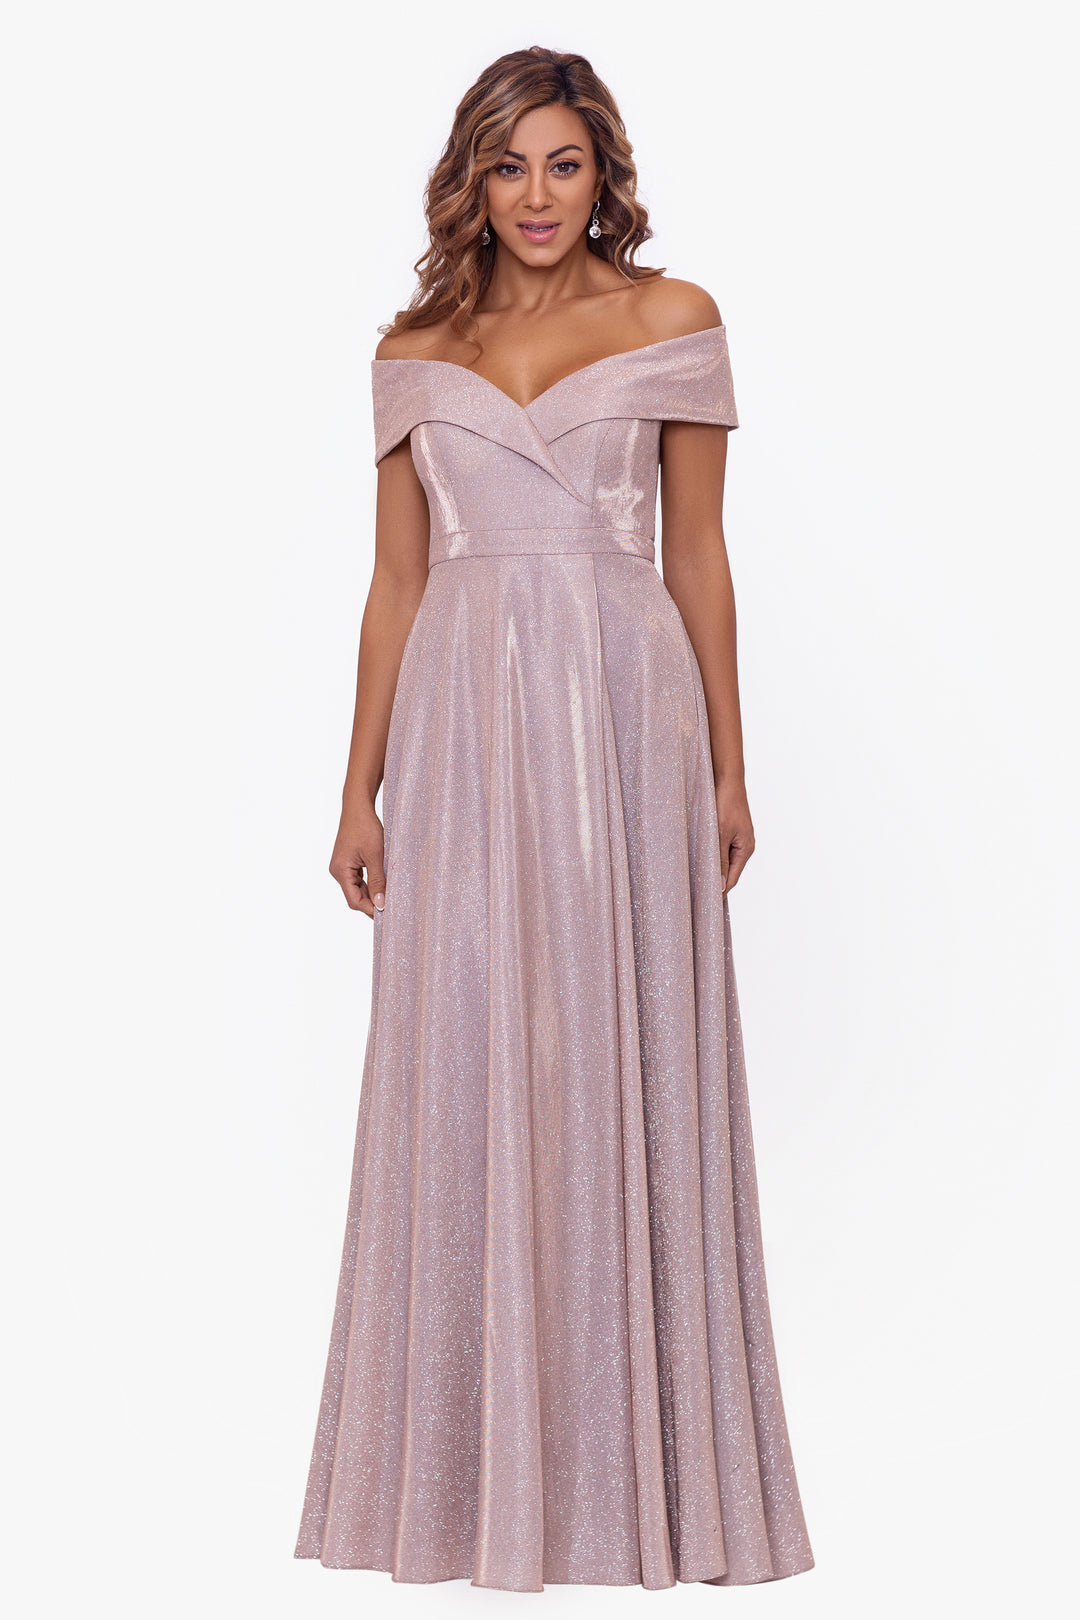 Petite "Willow" Off the Shoulder Glitter Knit Gown